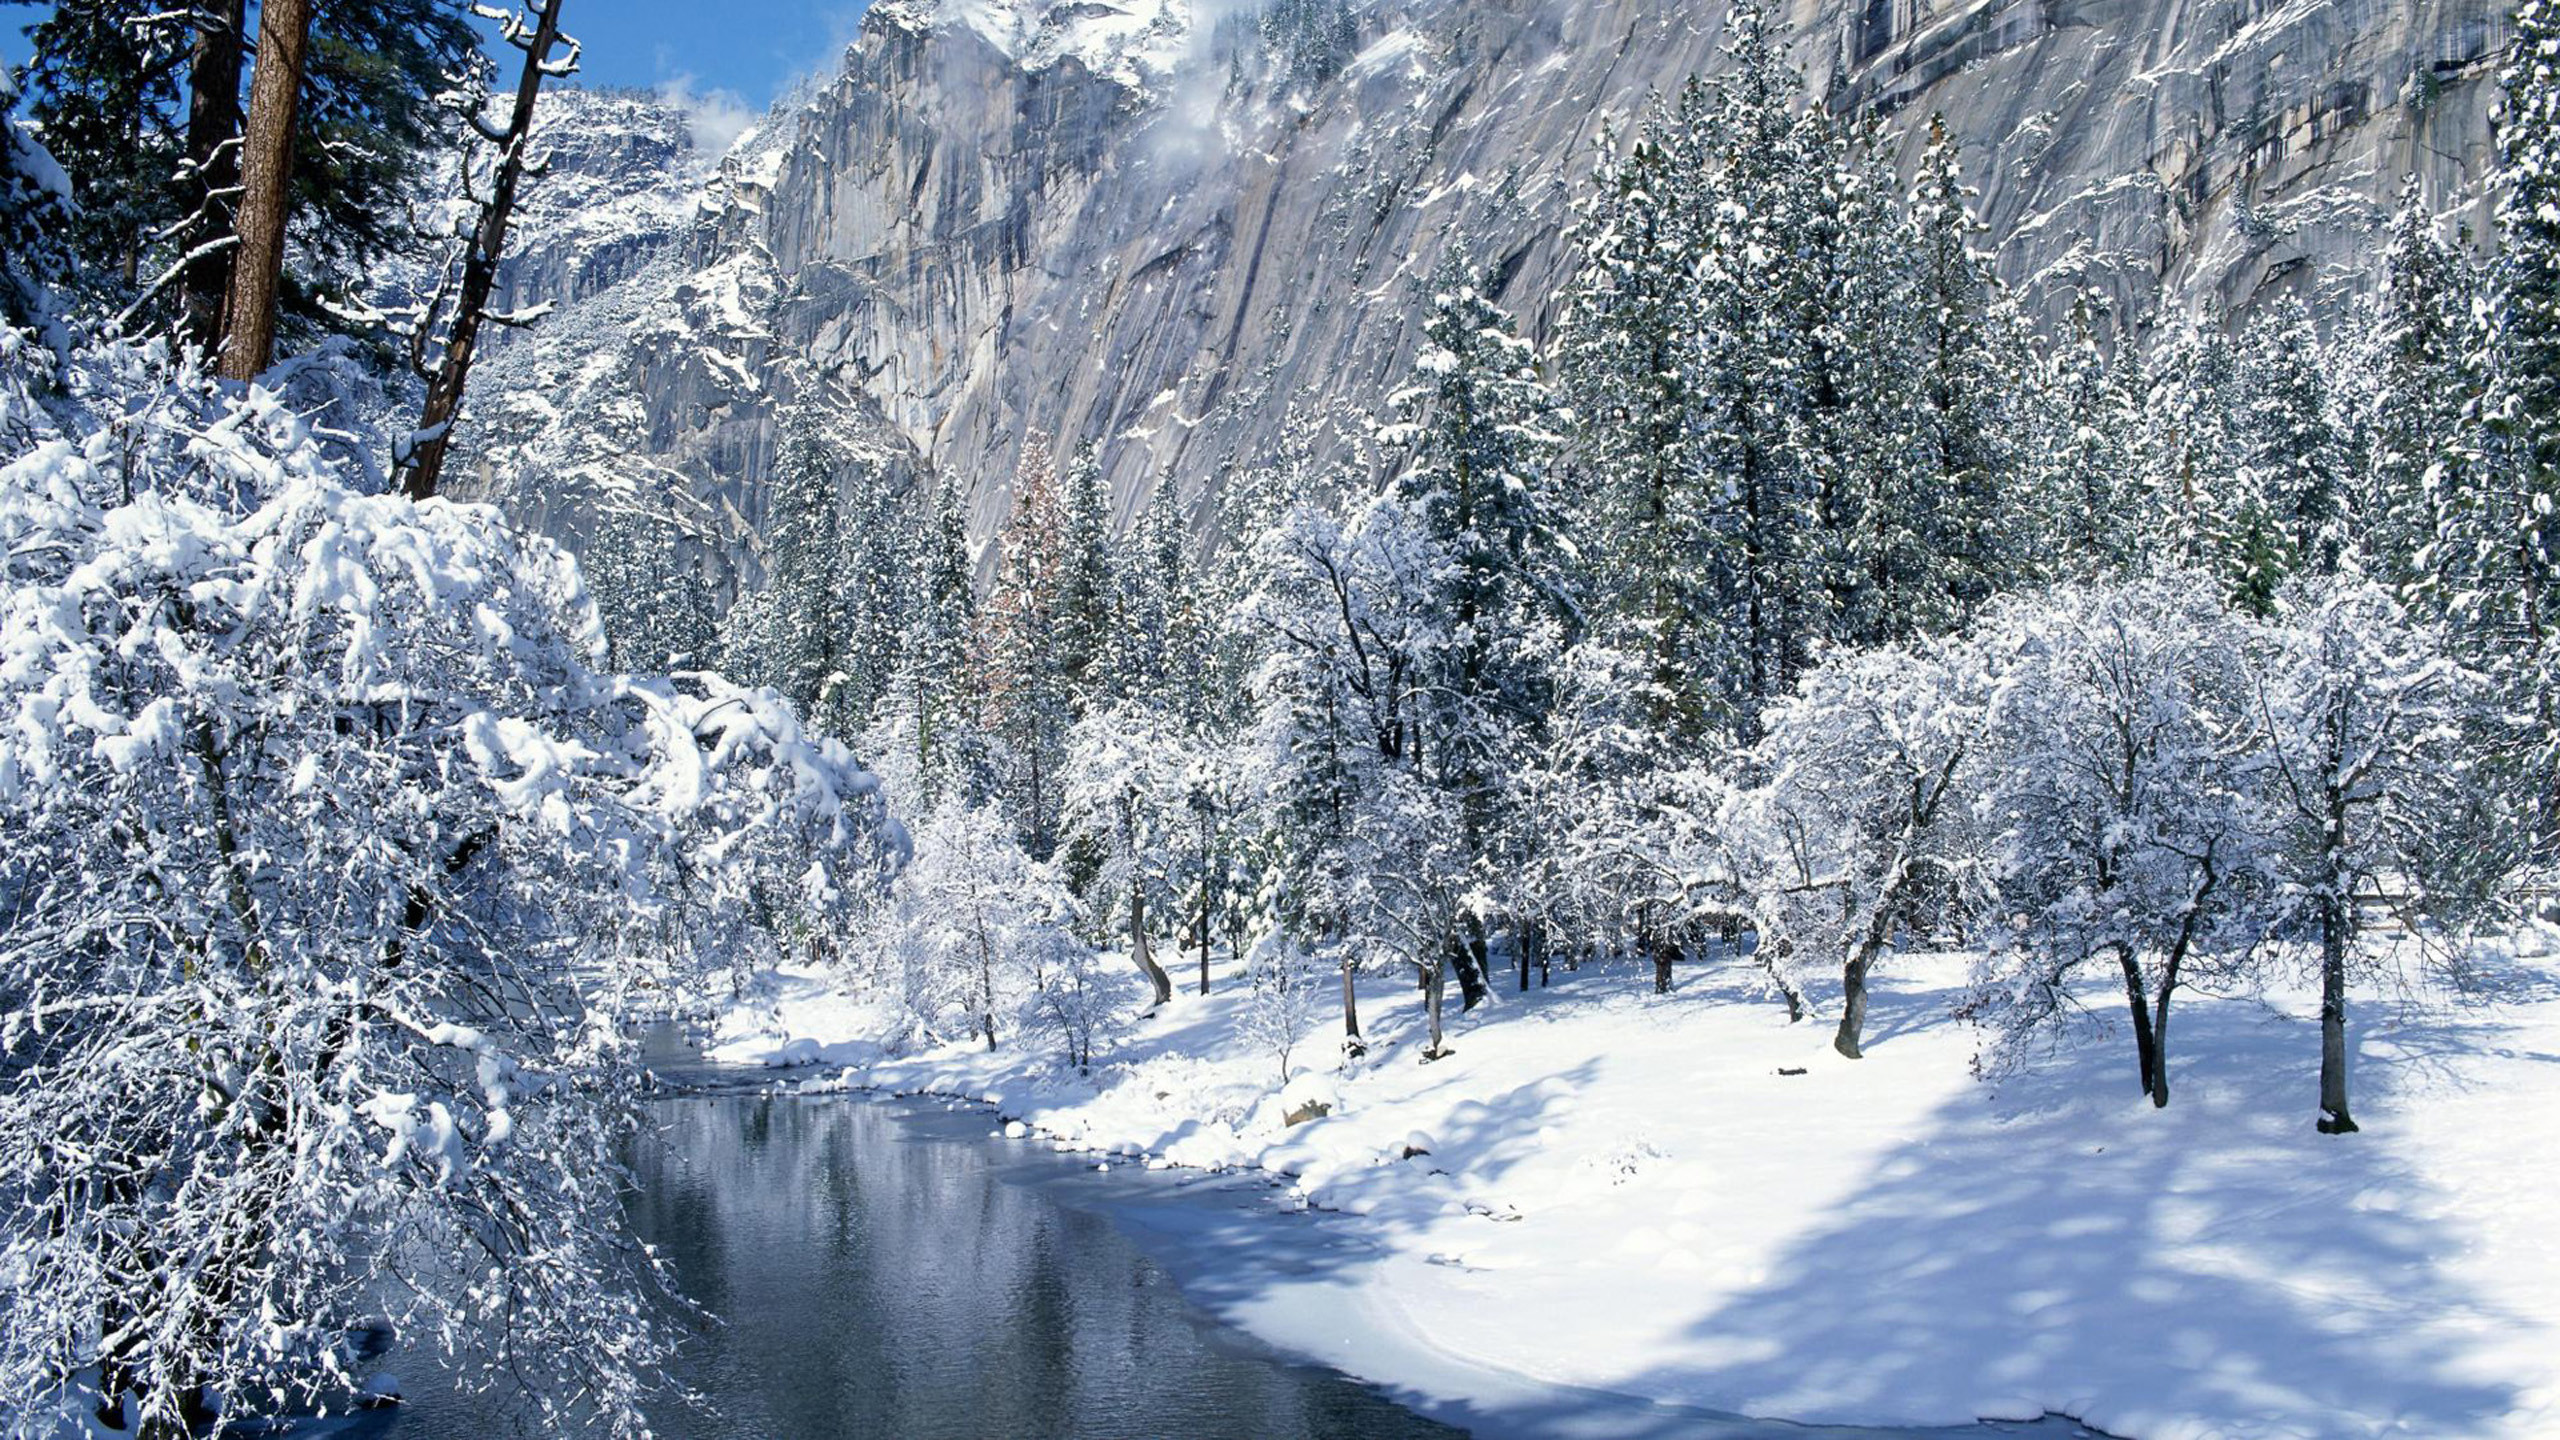 2560x1440  Winter TheWallpapers | Free Desktop Wallpapers for HD ... the snow  winter scene .